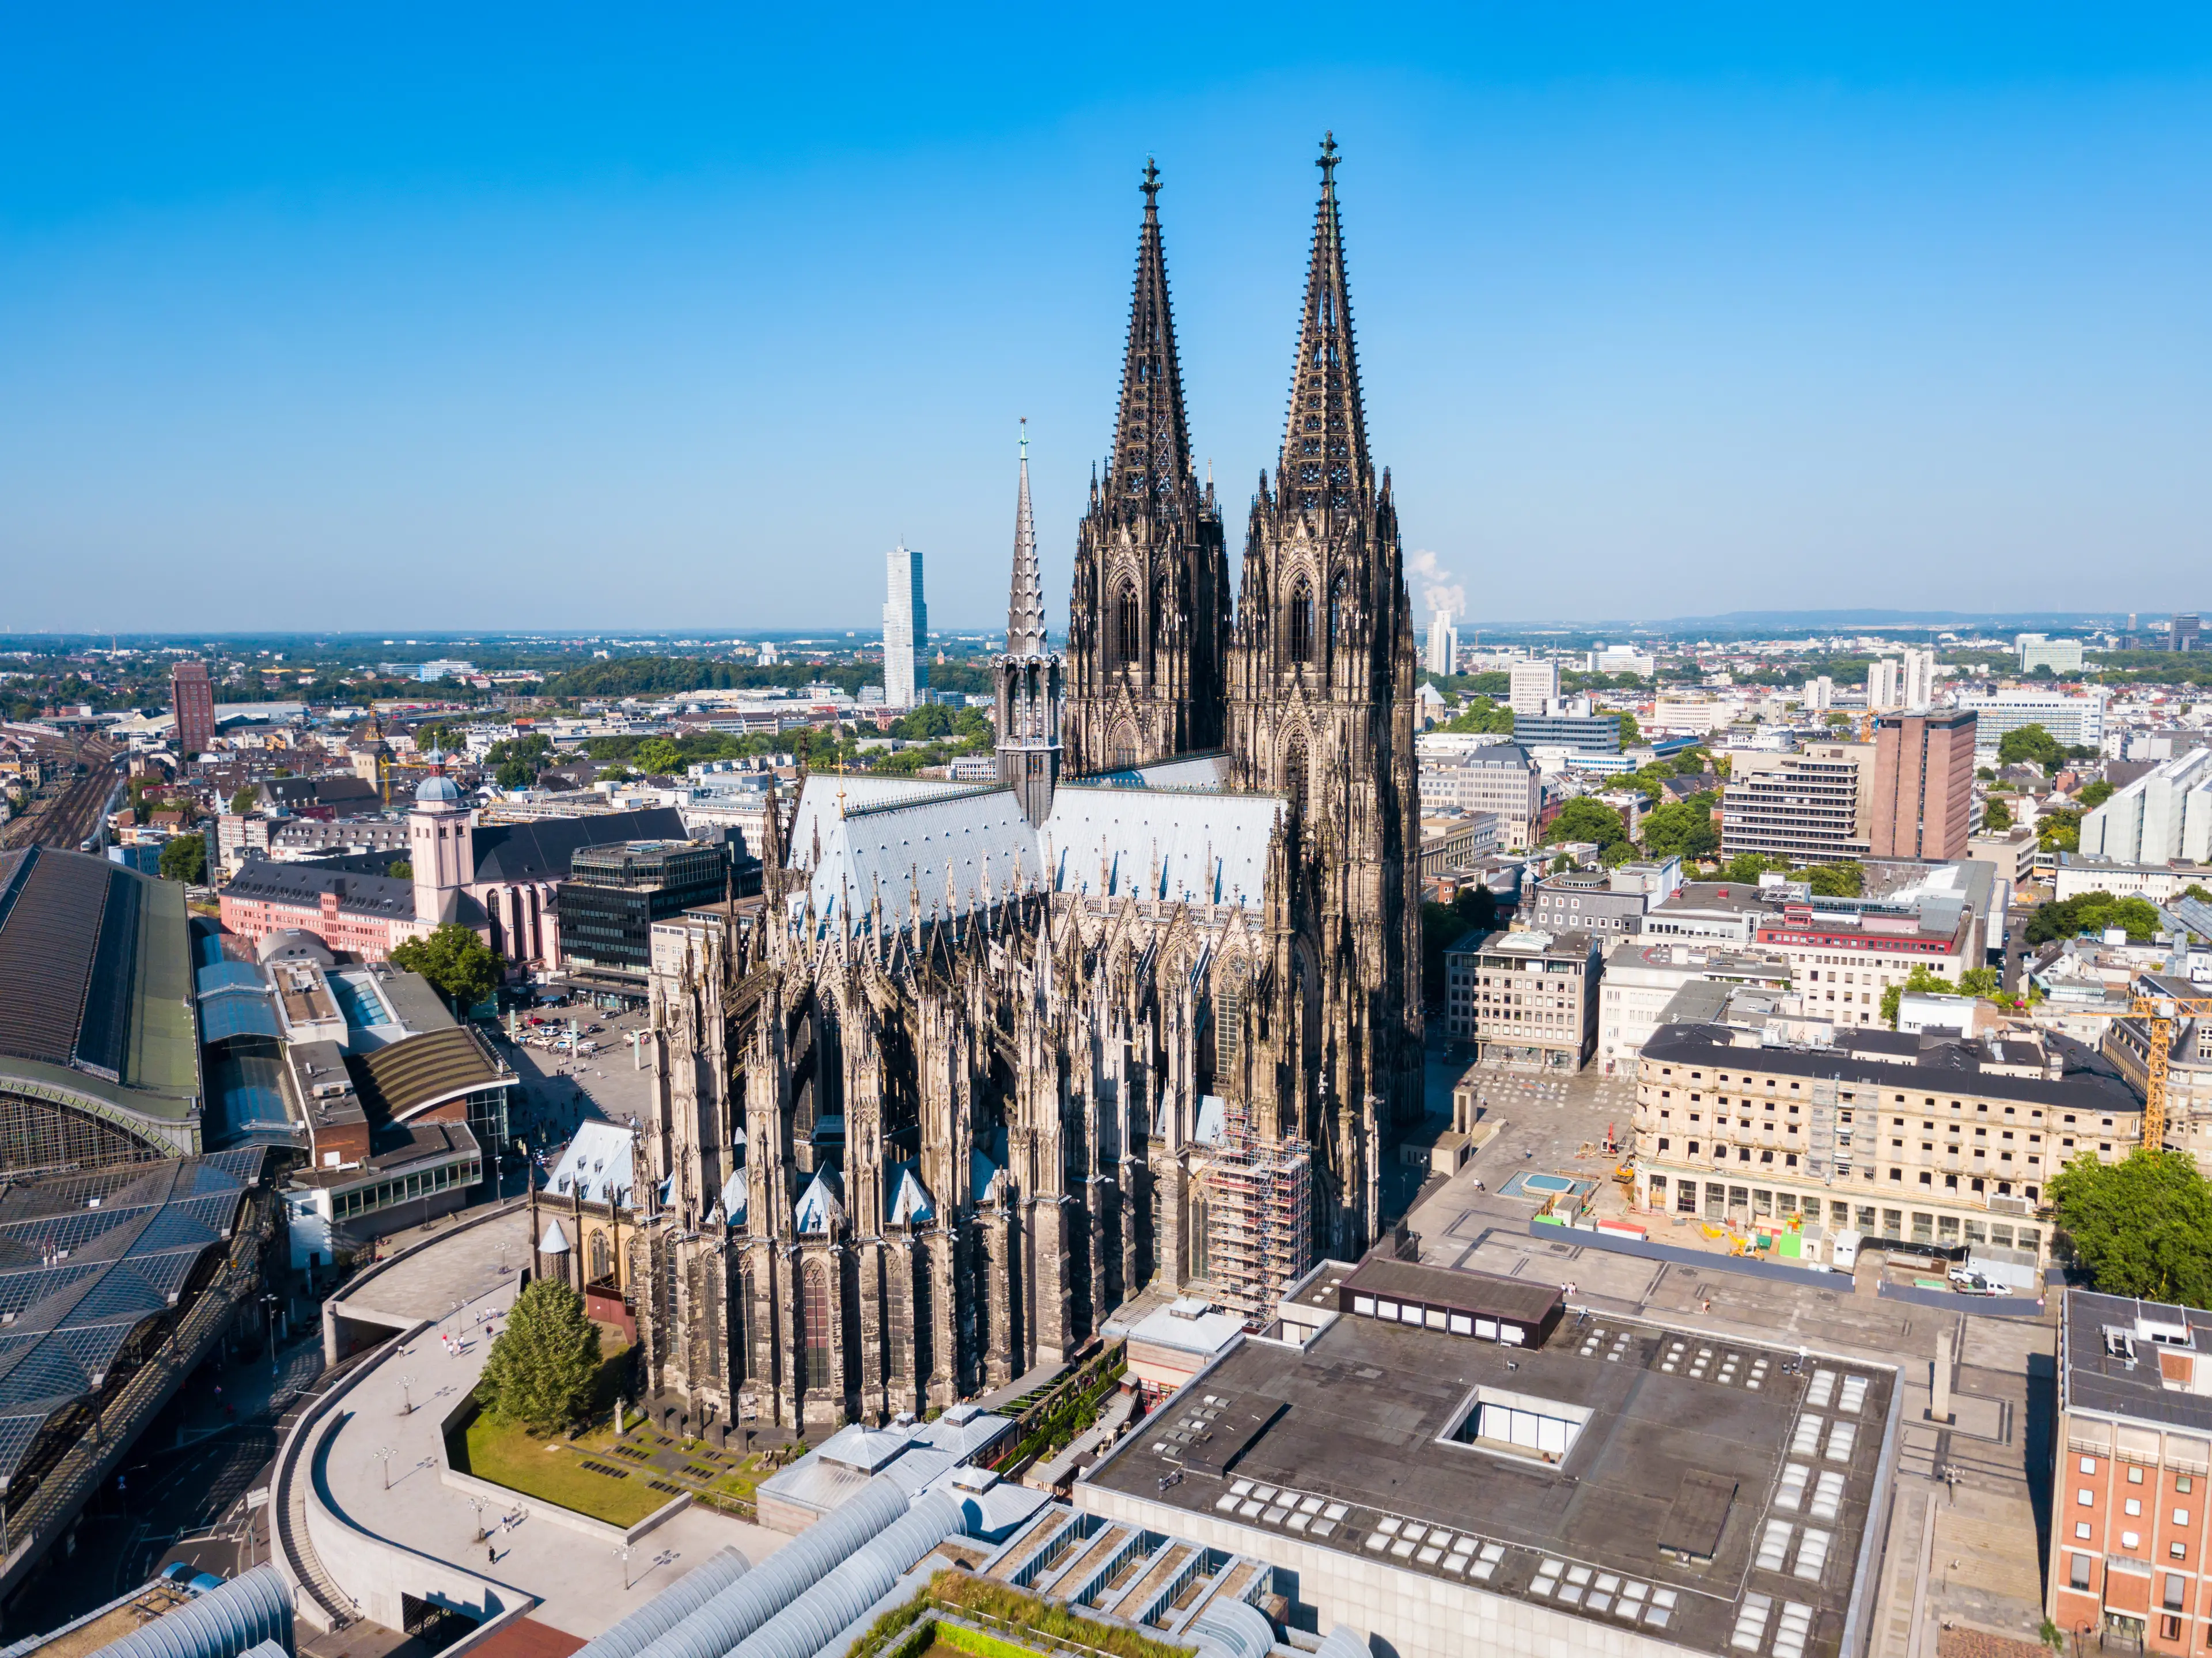 4-Day Scenic Journey Through Historic Cologne, Germany